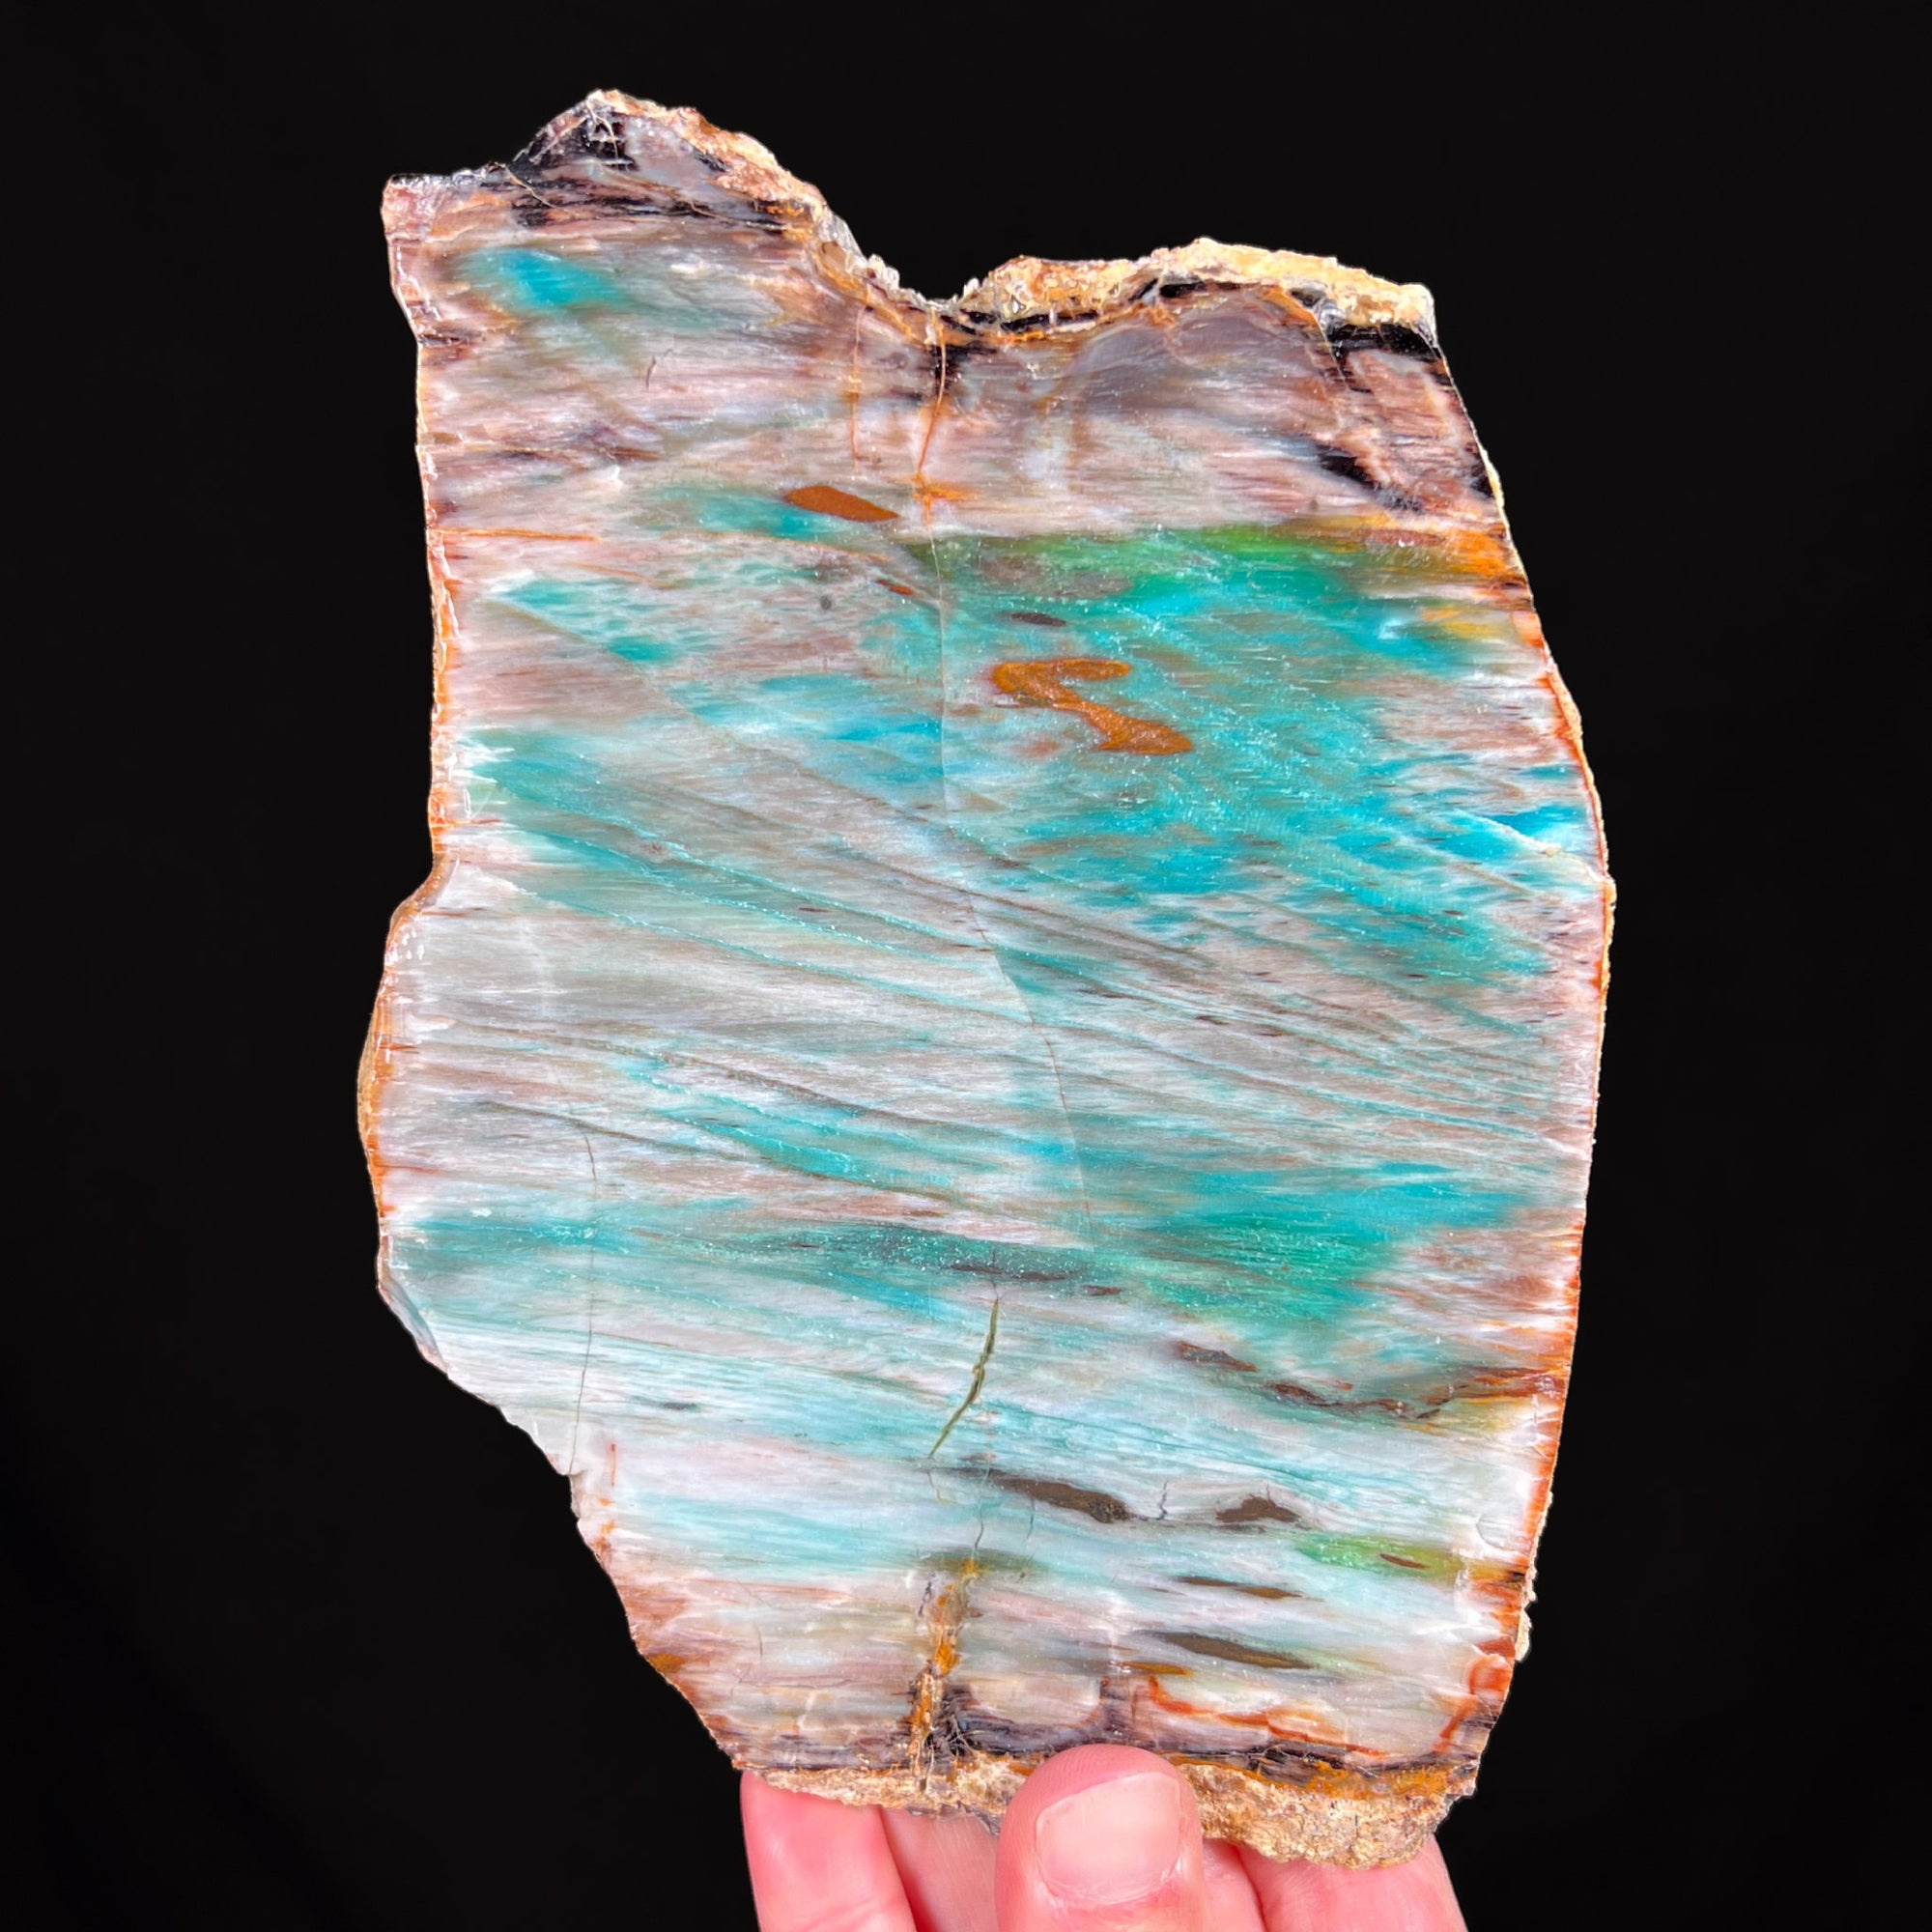 Petrified Wood with Copper Minerals from Turkey